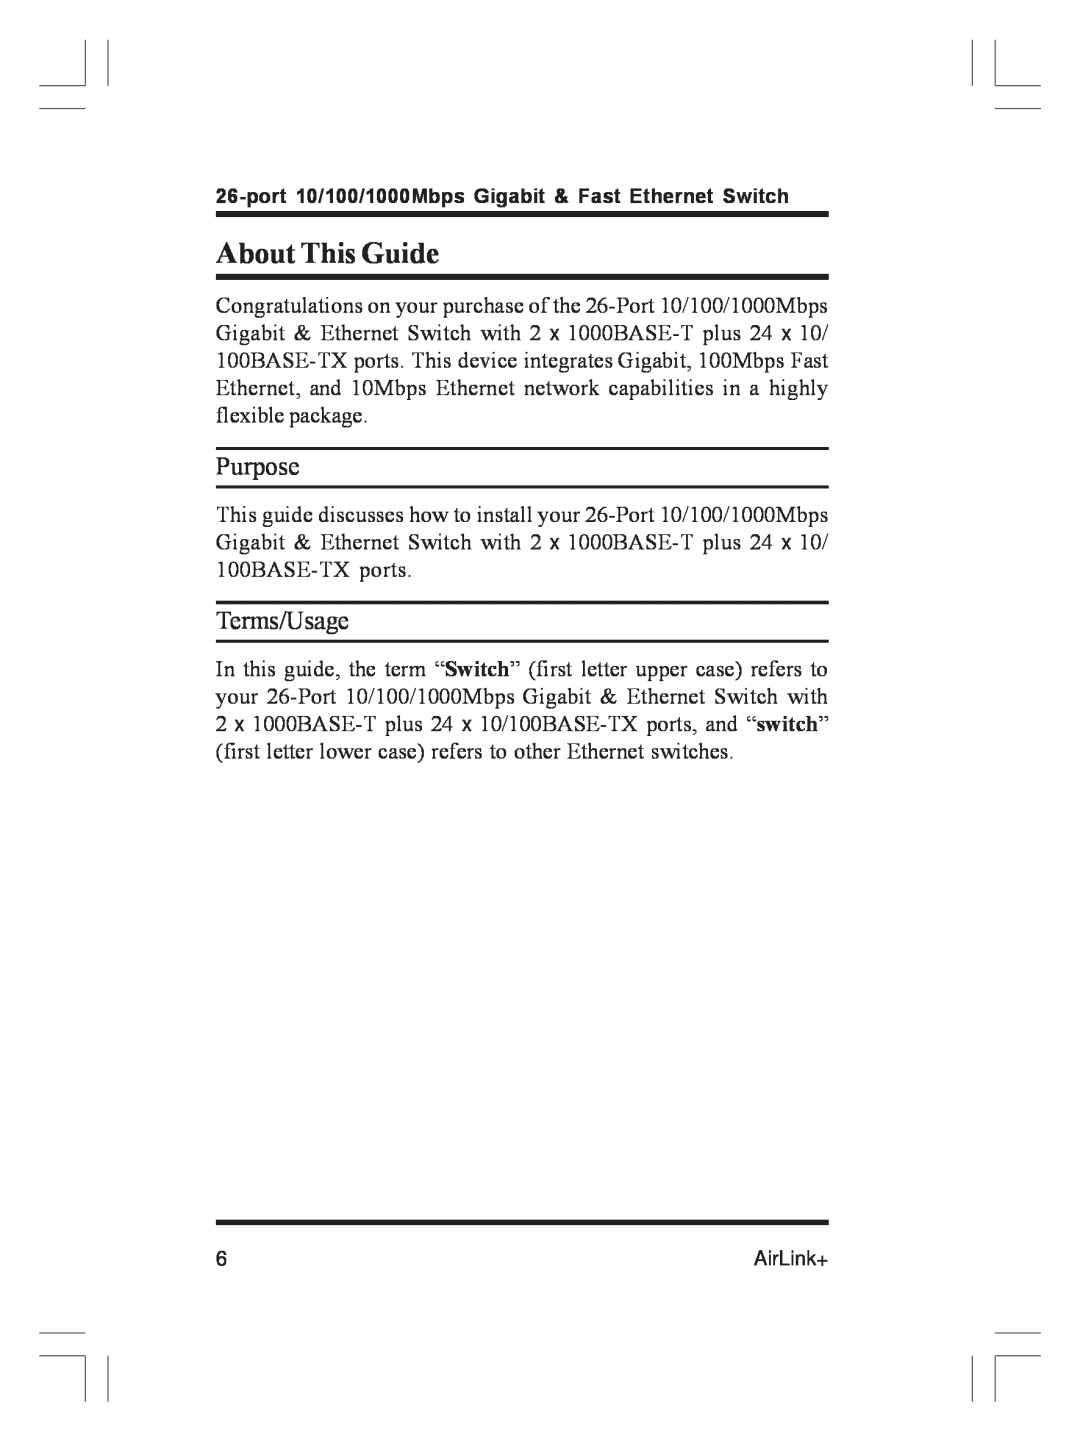 Airlink ASW-2402 manual About This Guide, Purpose, Terms/Usage 